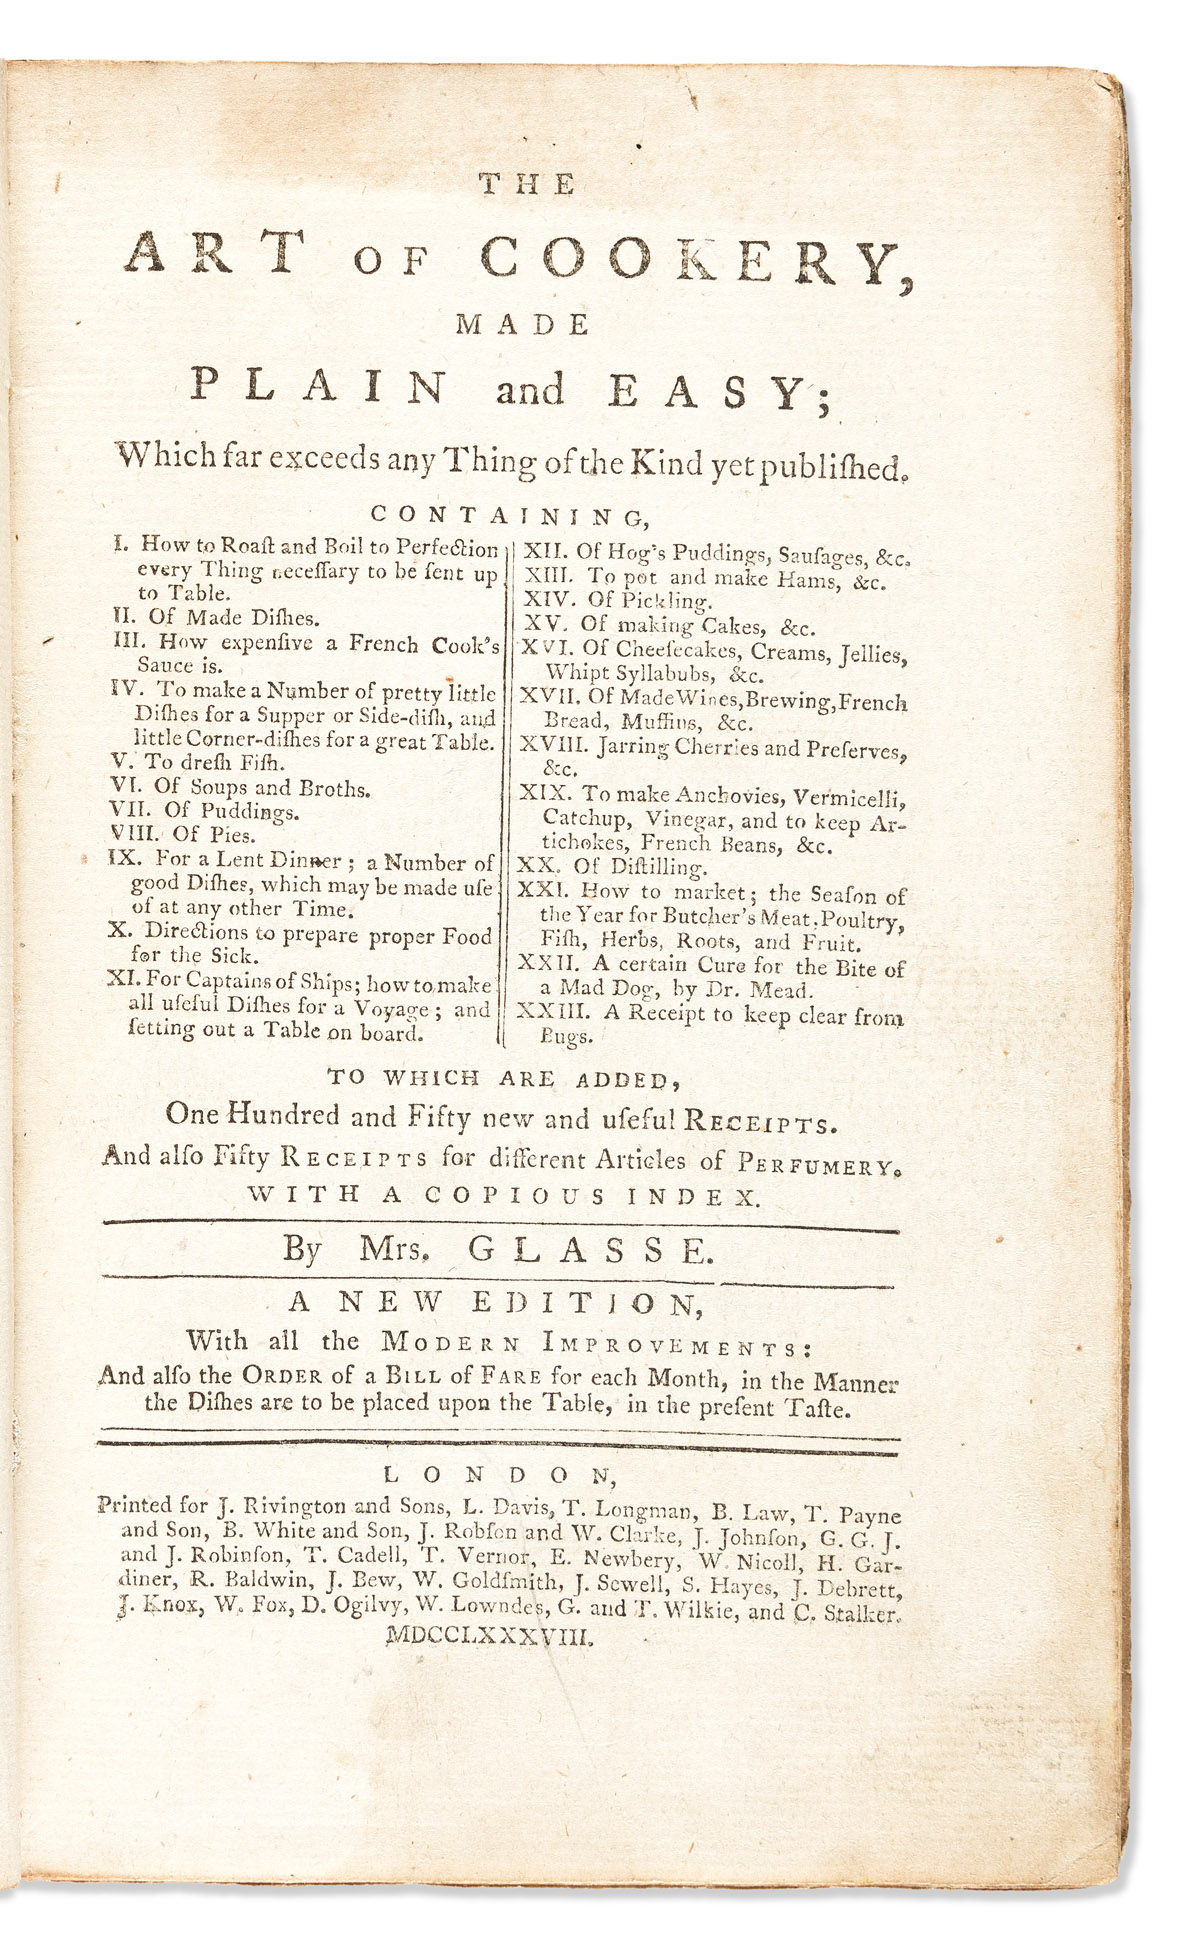 Cookbooks by Women, Two British Examples: 1788 & 1811.